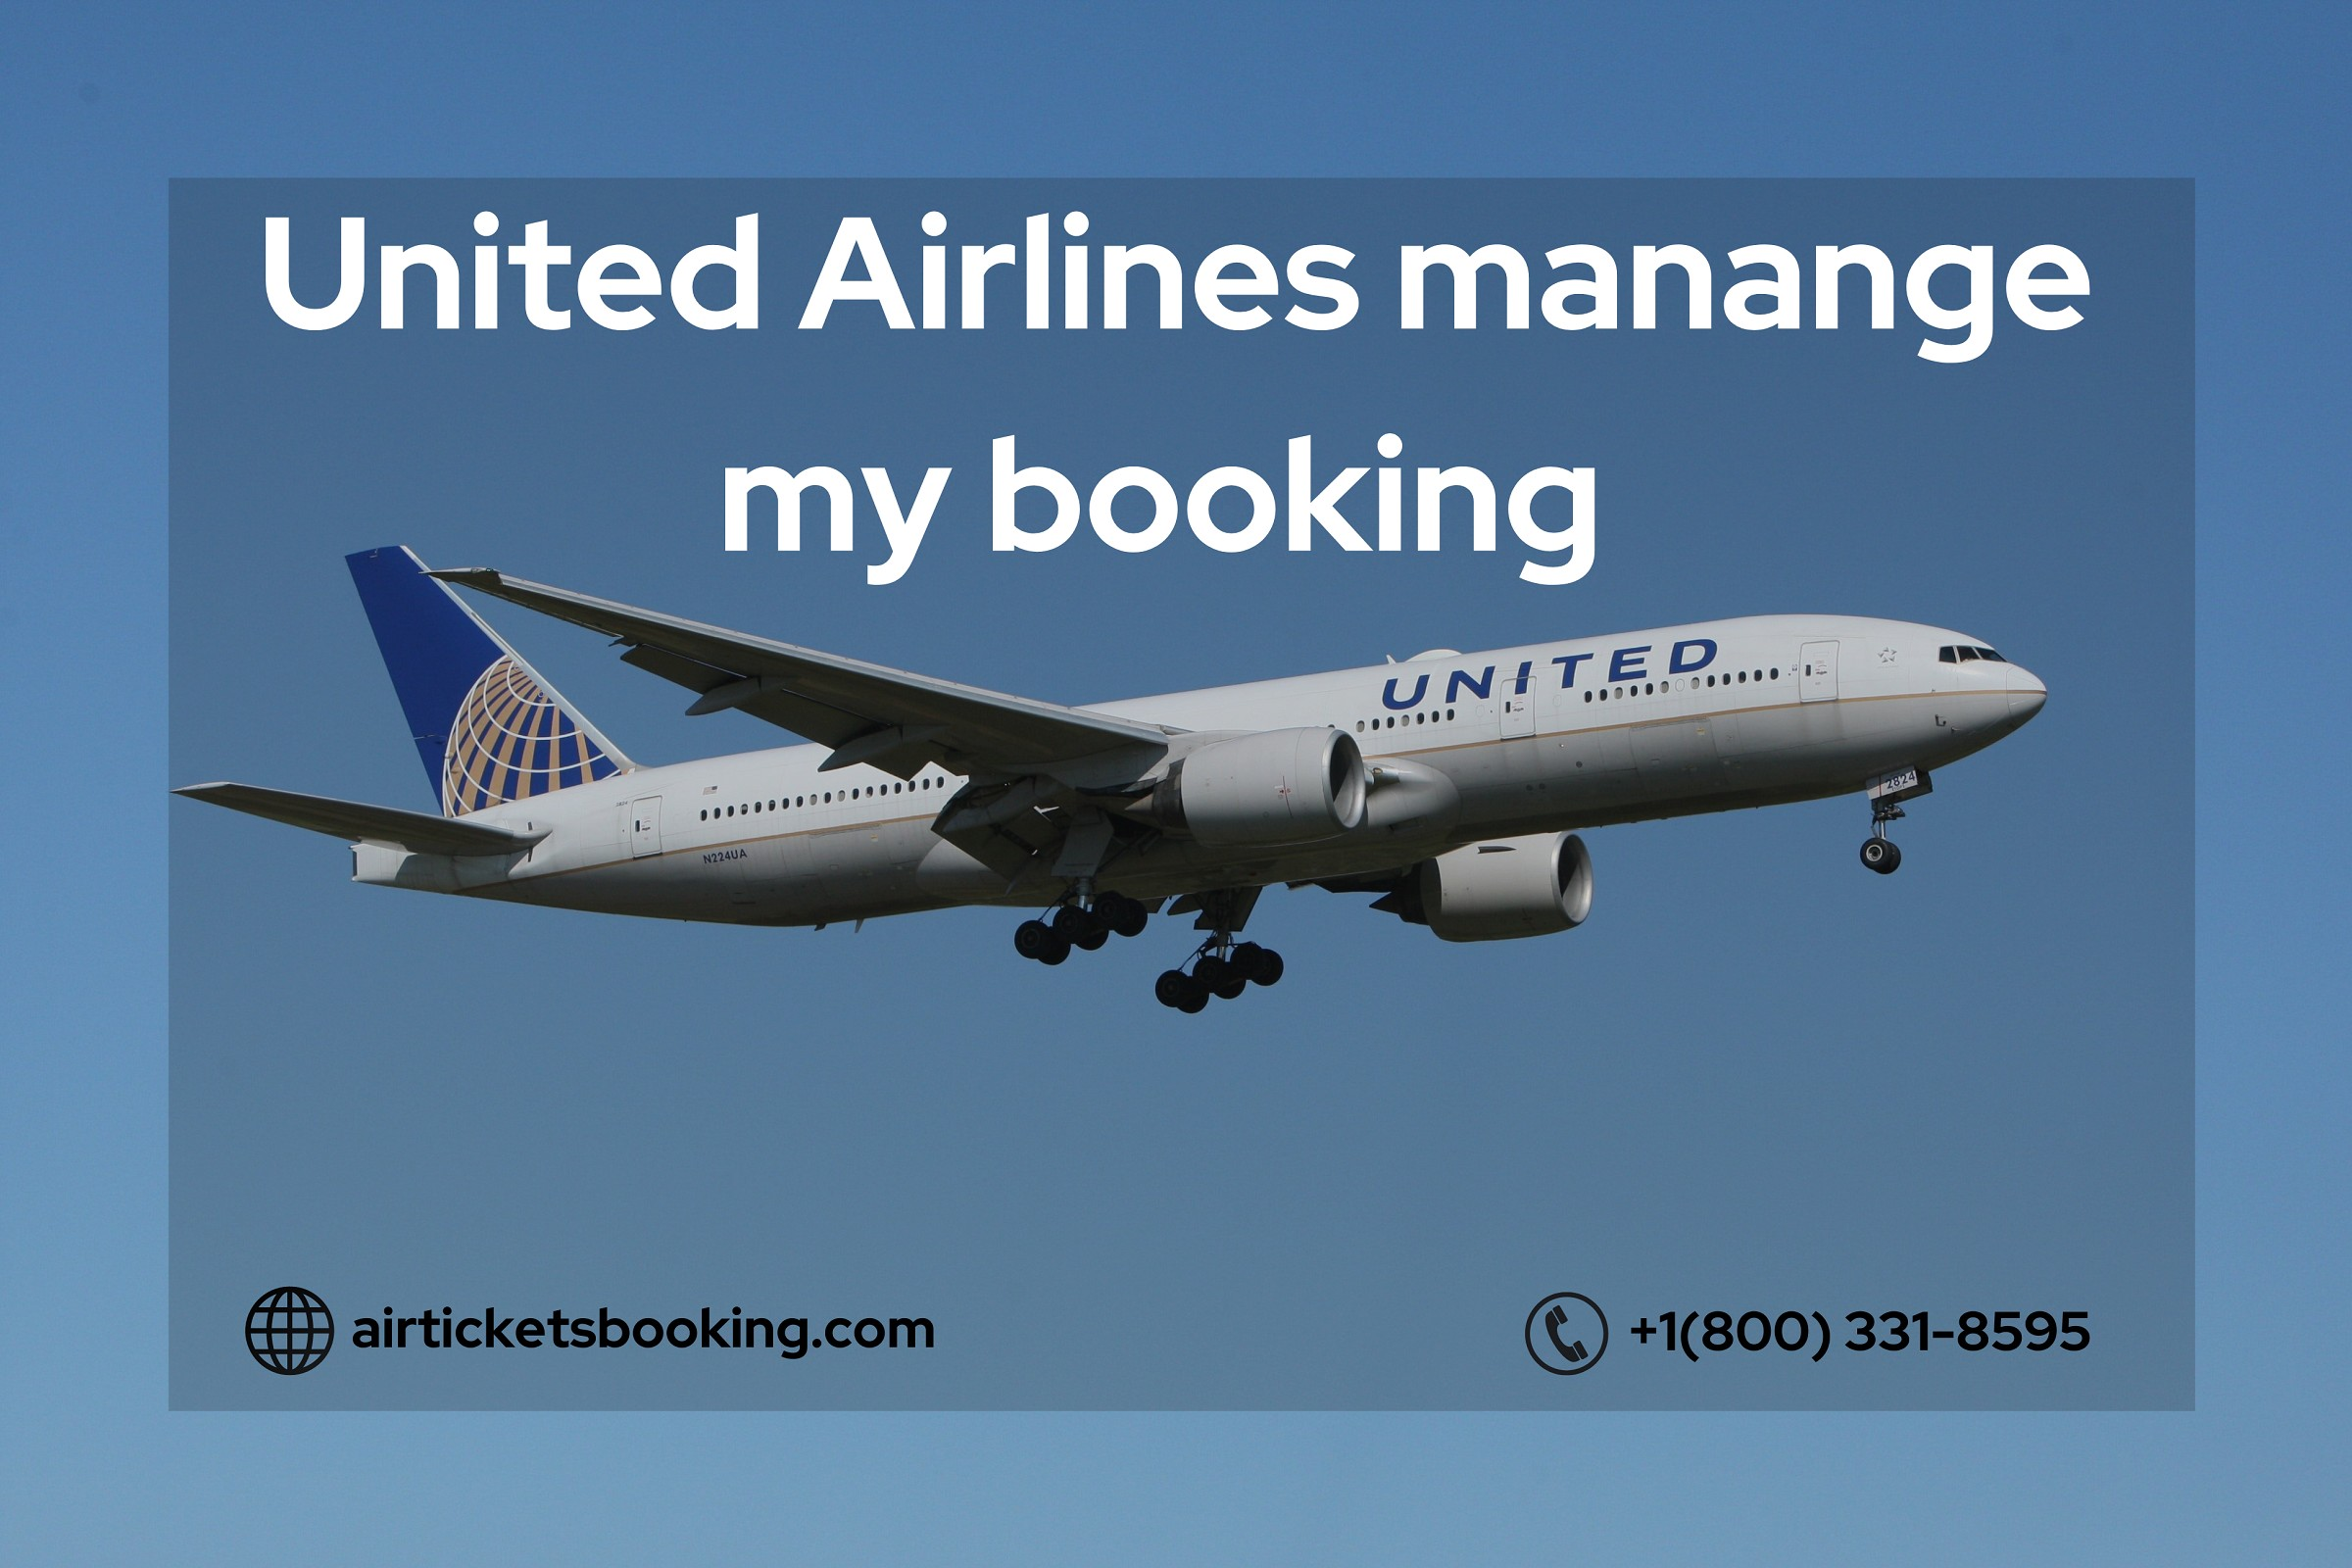 United airline manage flight booking 